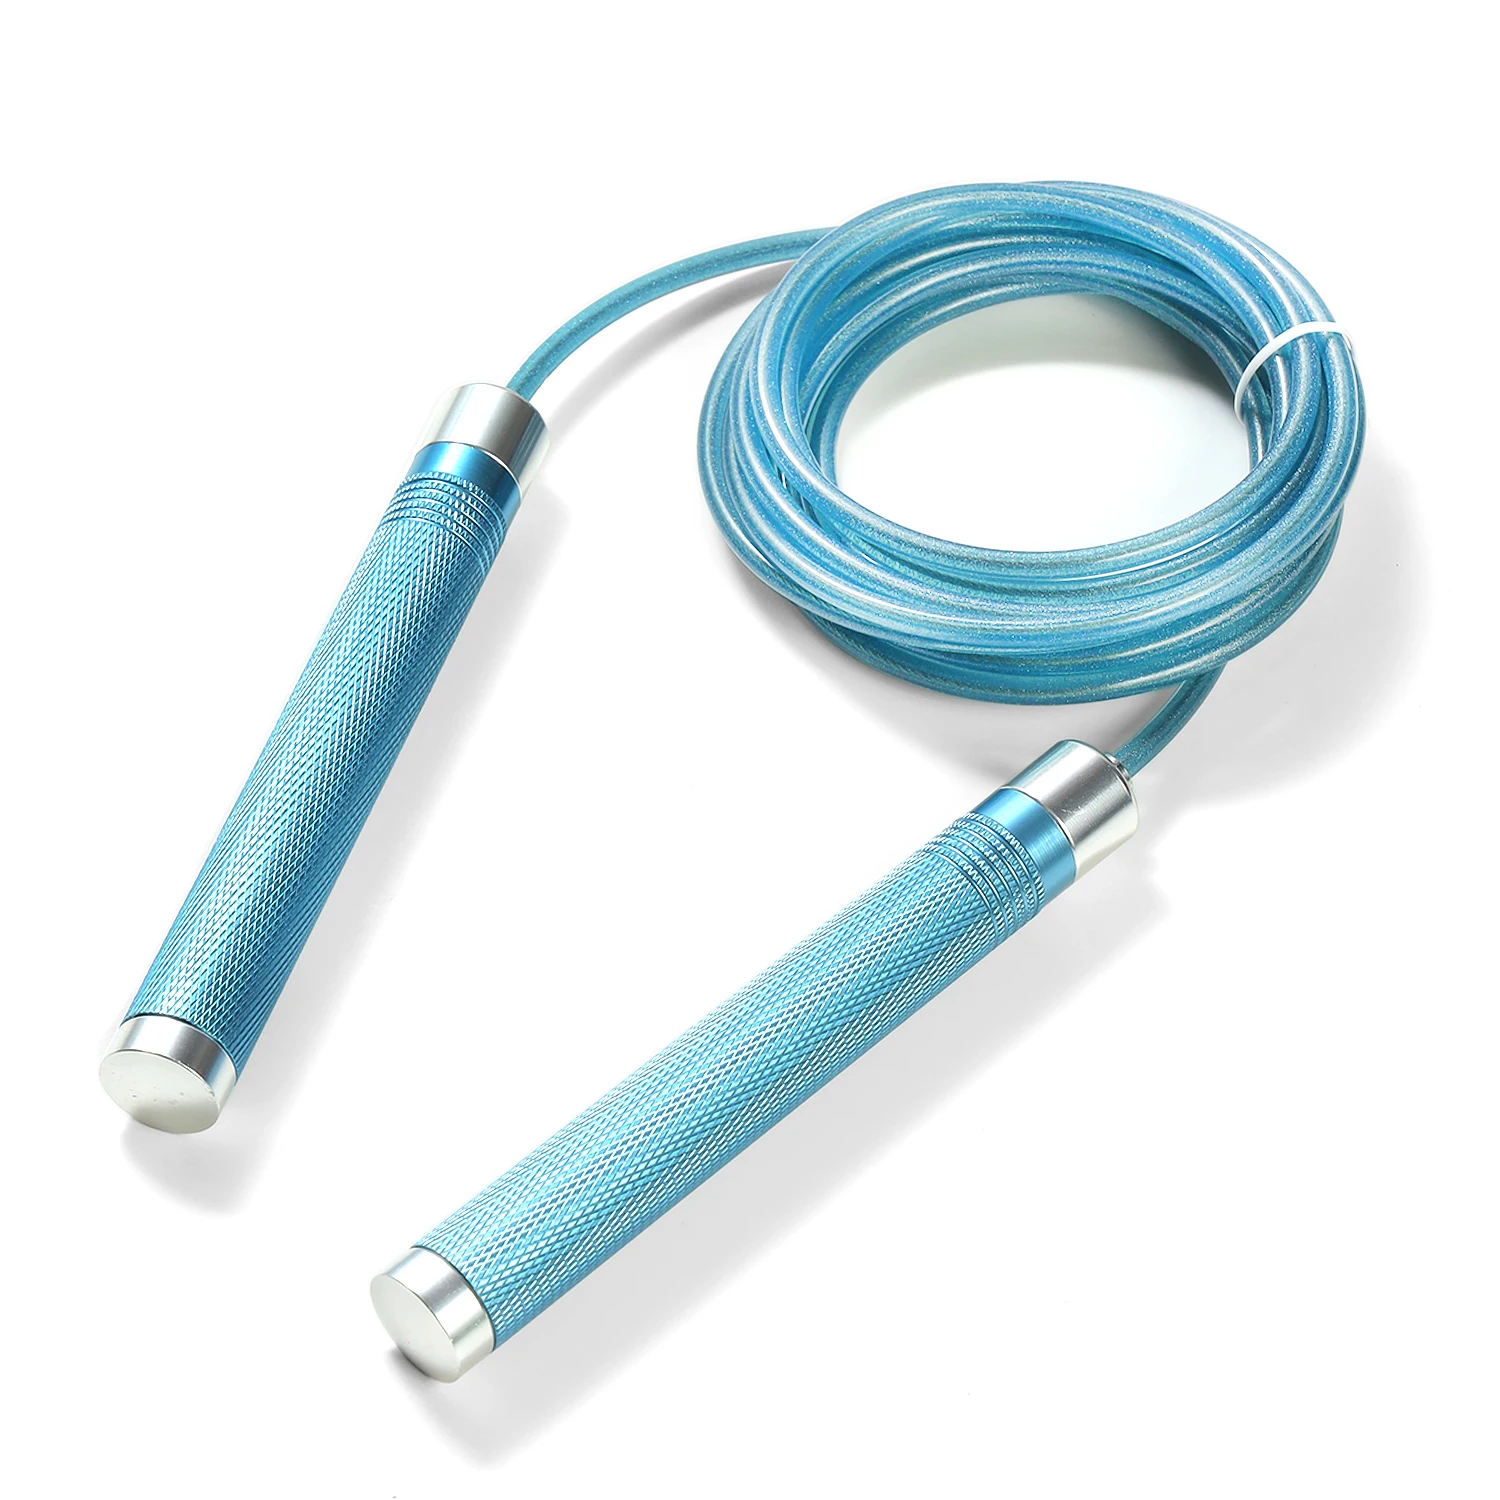 Hot sale professional customized color Aluminum Alloy handle jump rope adjustable speed skipping rope with logo